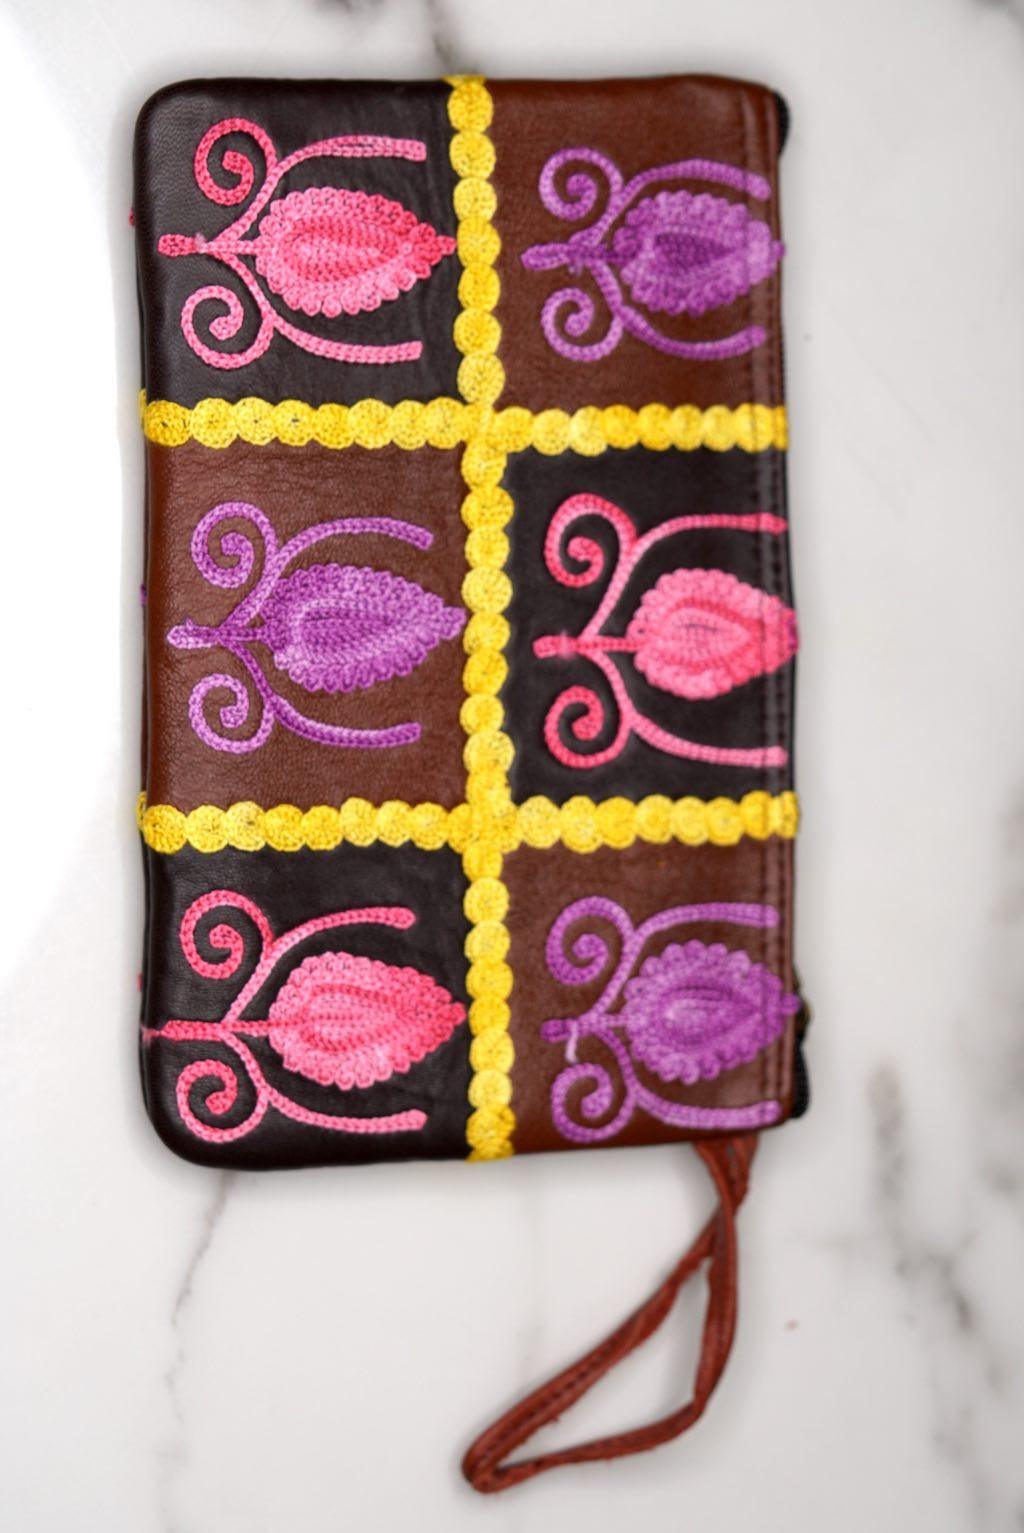 Vibrant colorful purse with kashmiri hand embroidery, has a secure zip top closure, ethically made in Nepal.